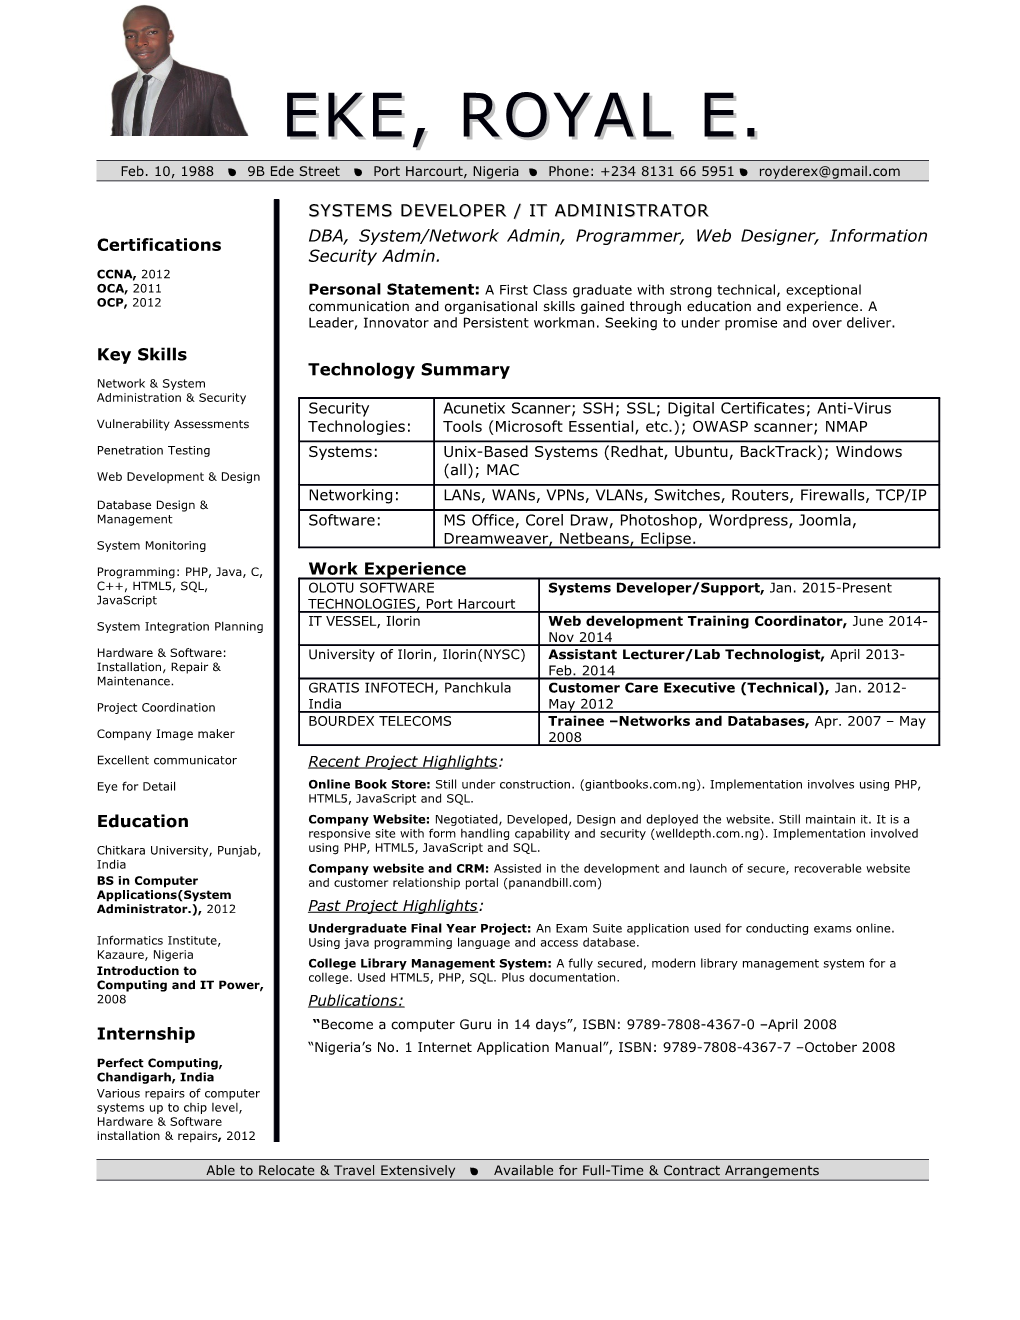 Sample Resume for an Information Security Specialist